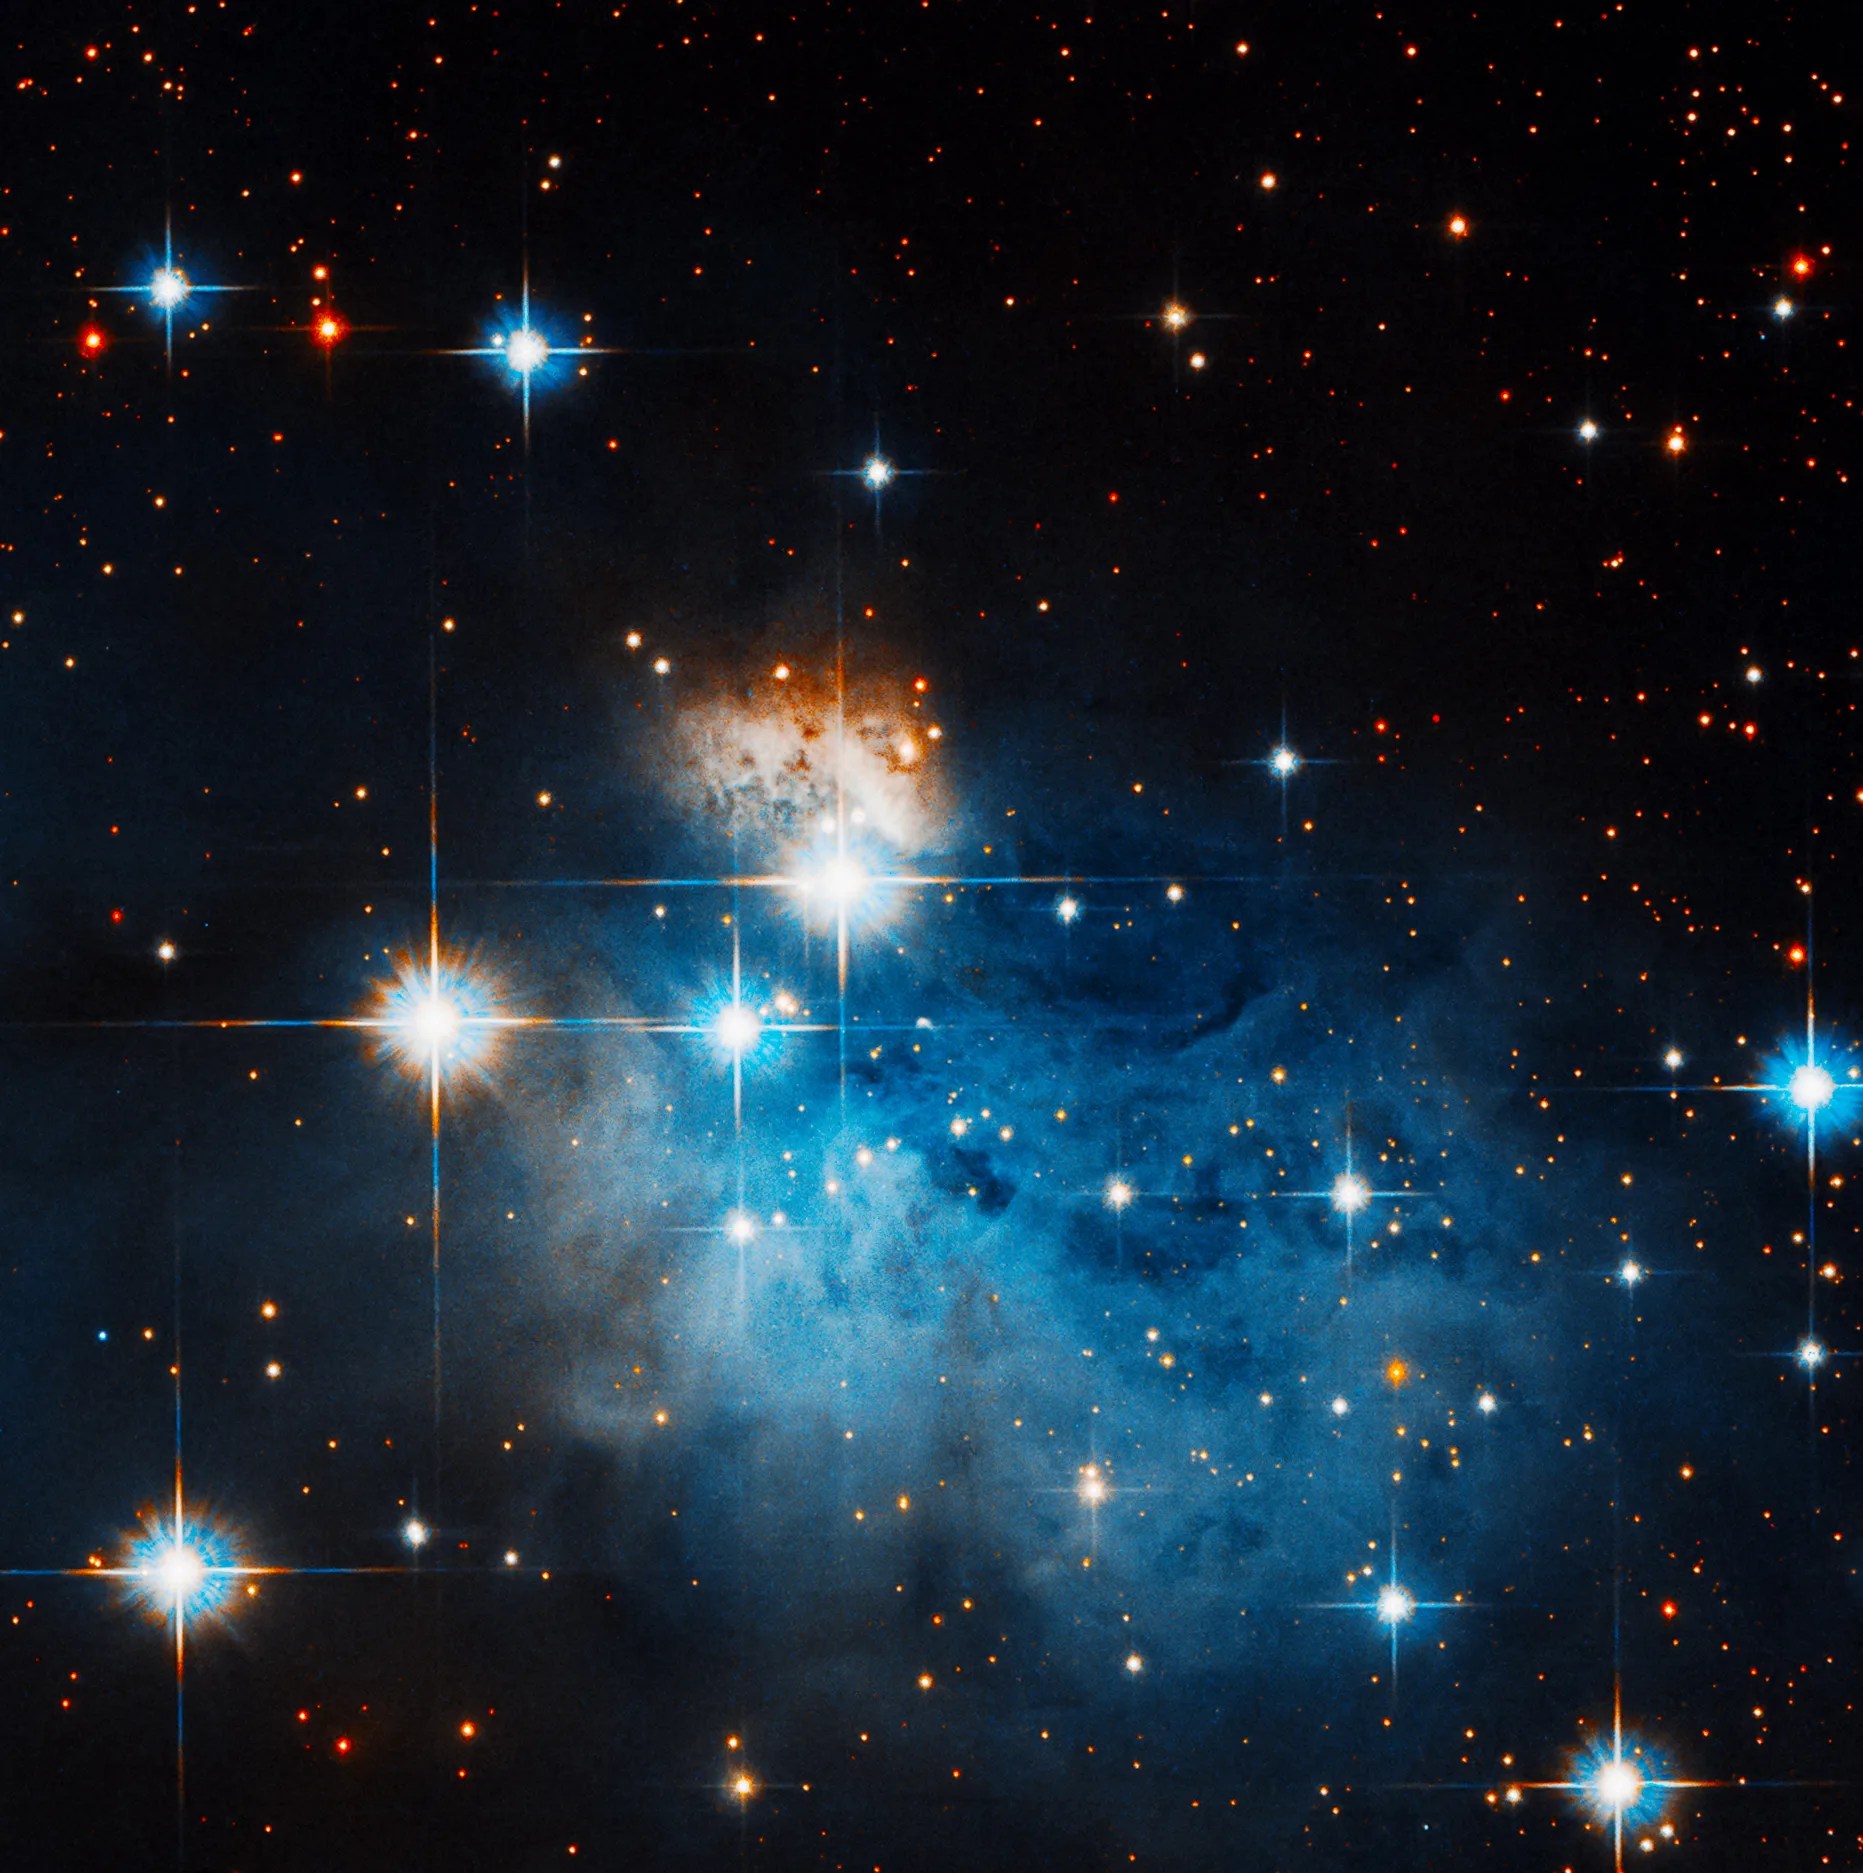 A handful of bright stars amidst and around a blue misty blob of glowing gas.